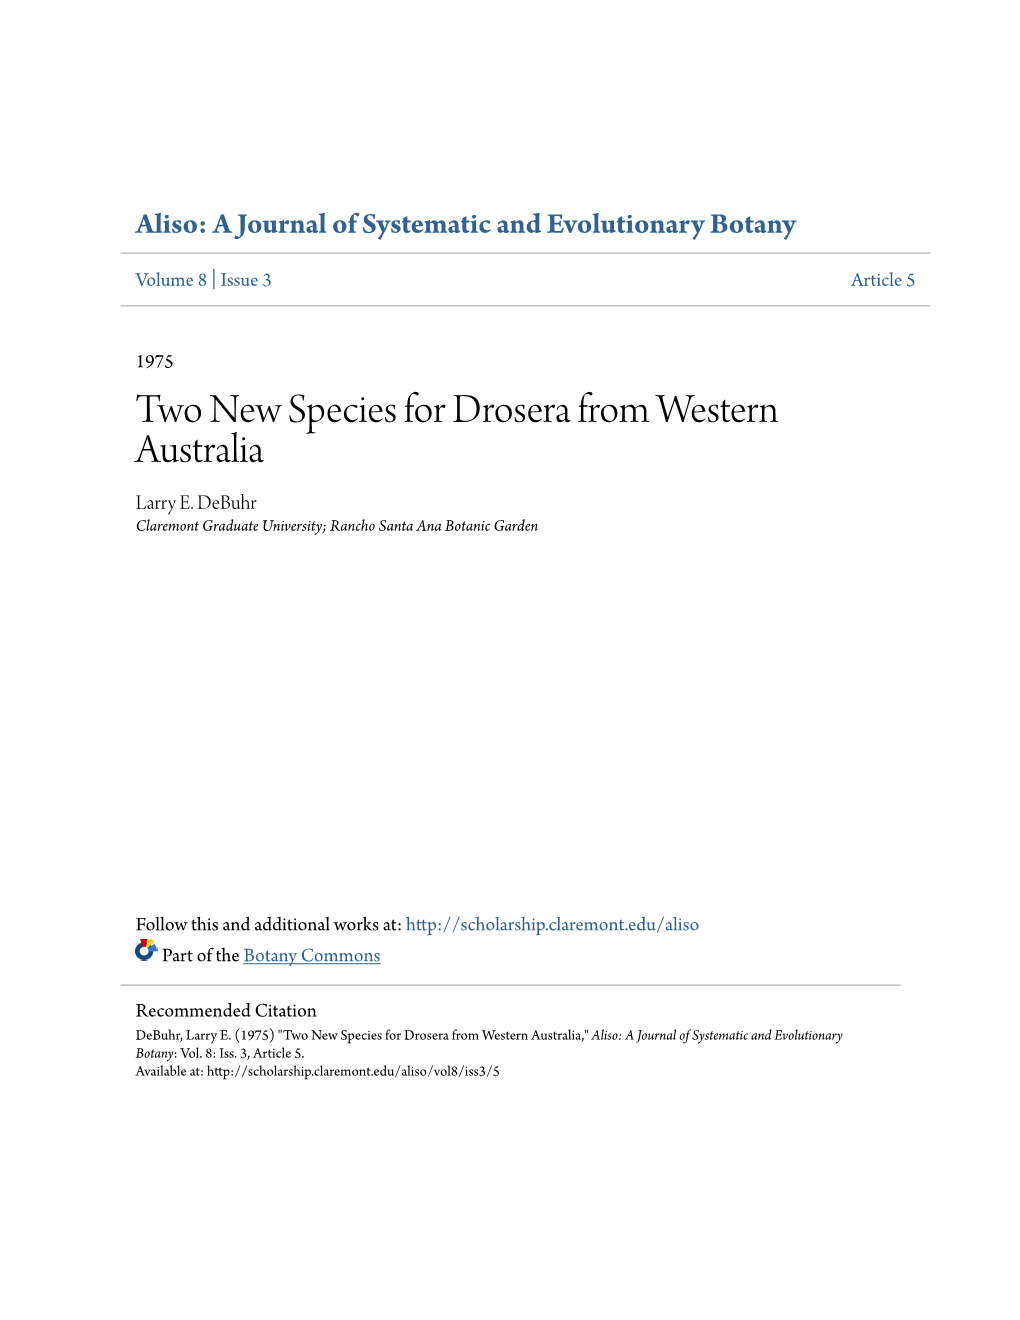 Two New Species for Drosera from Western Australia Larry E